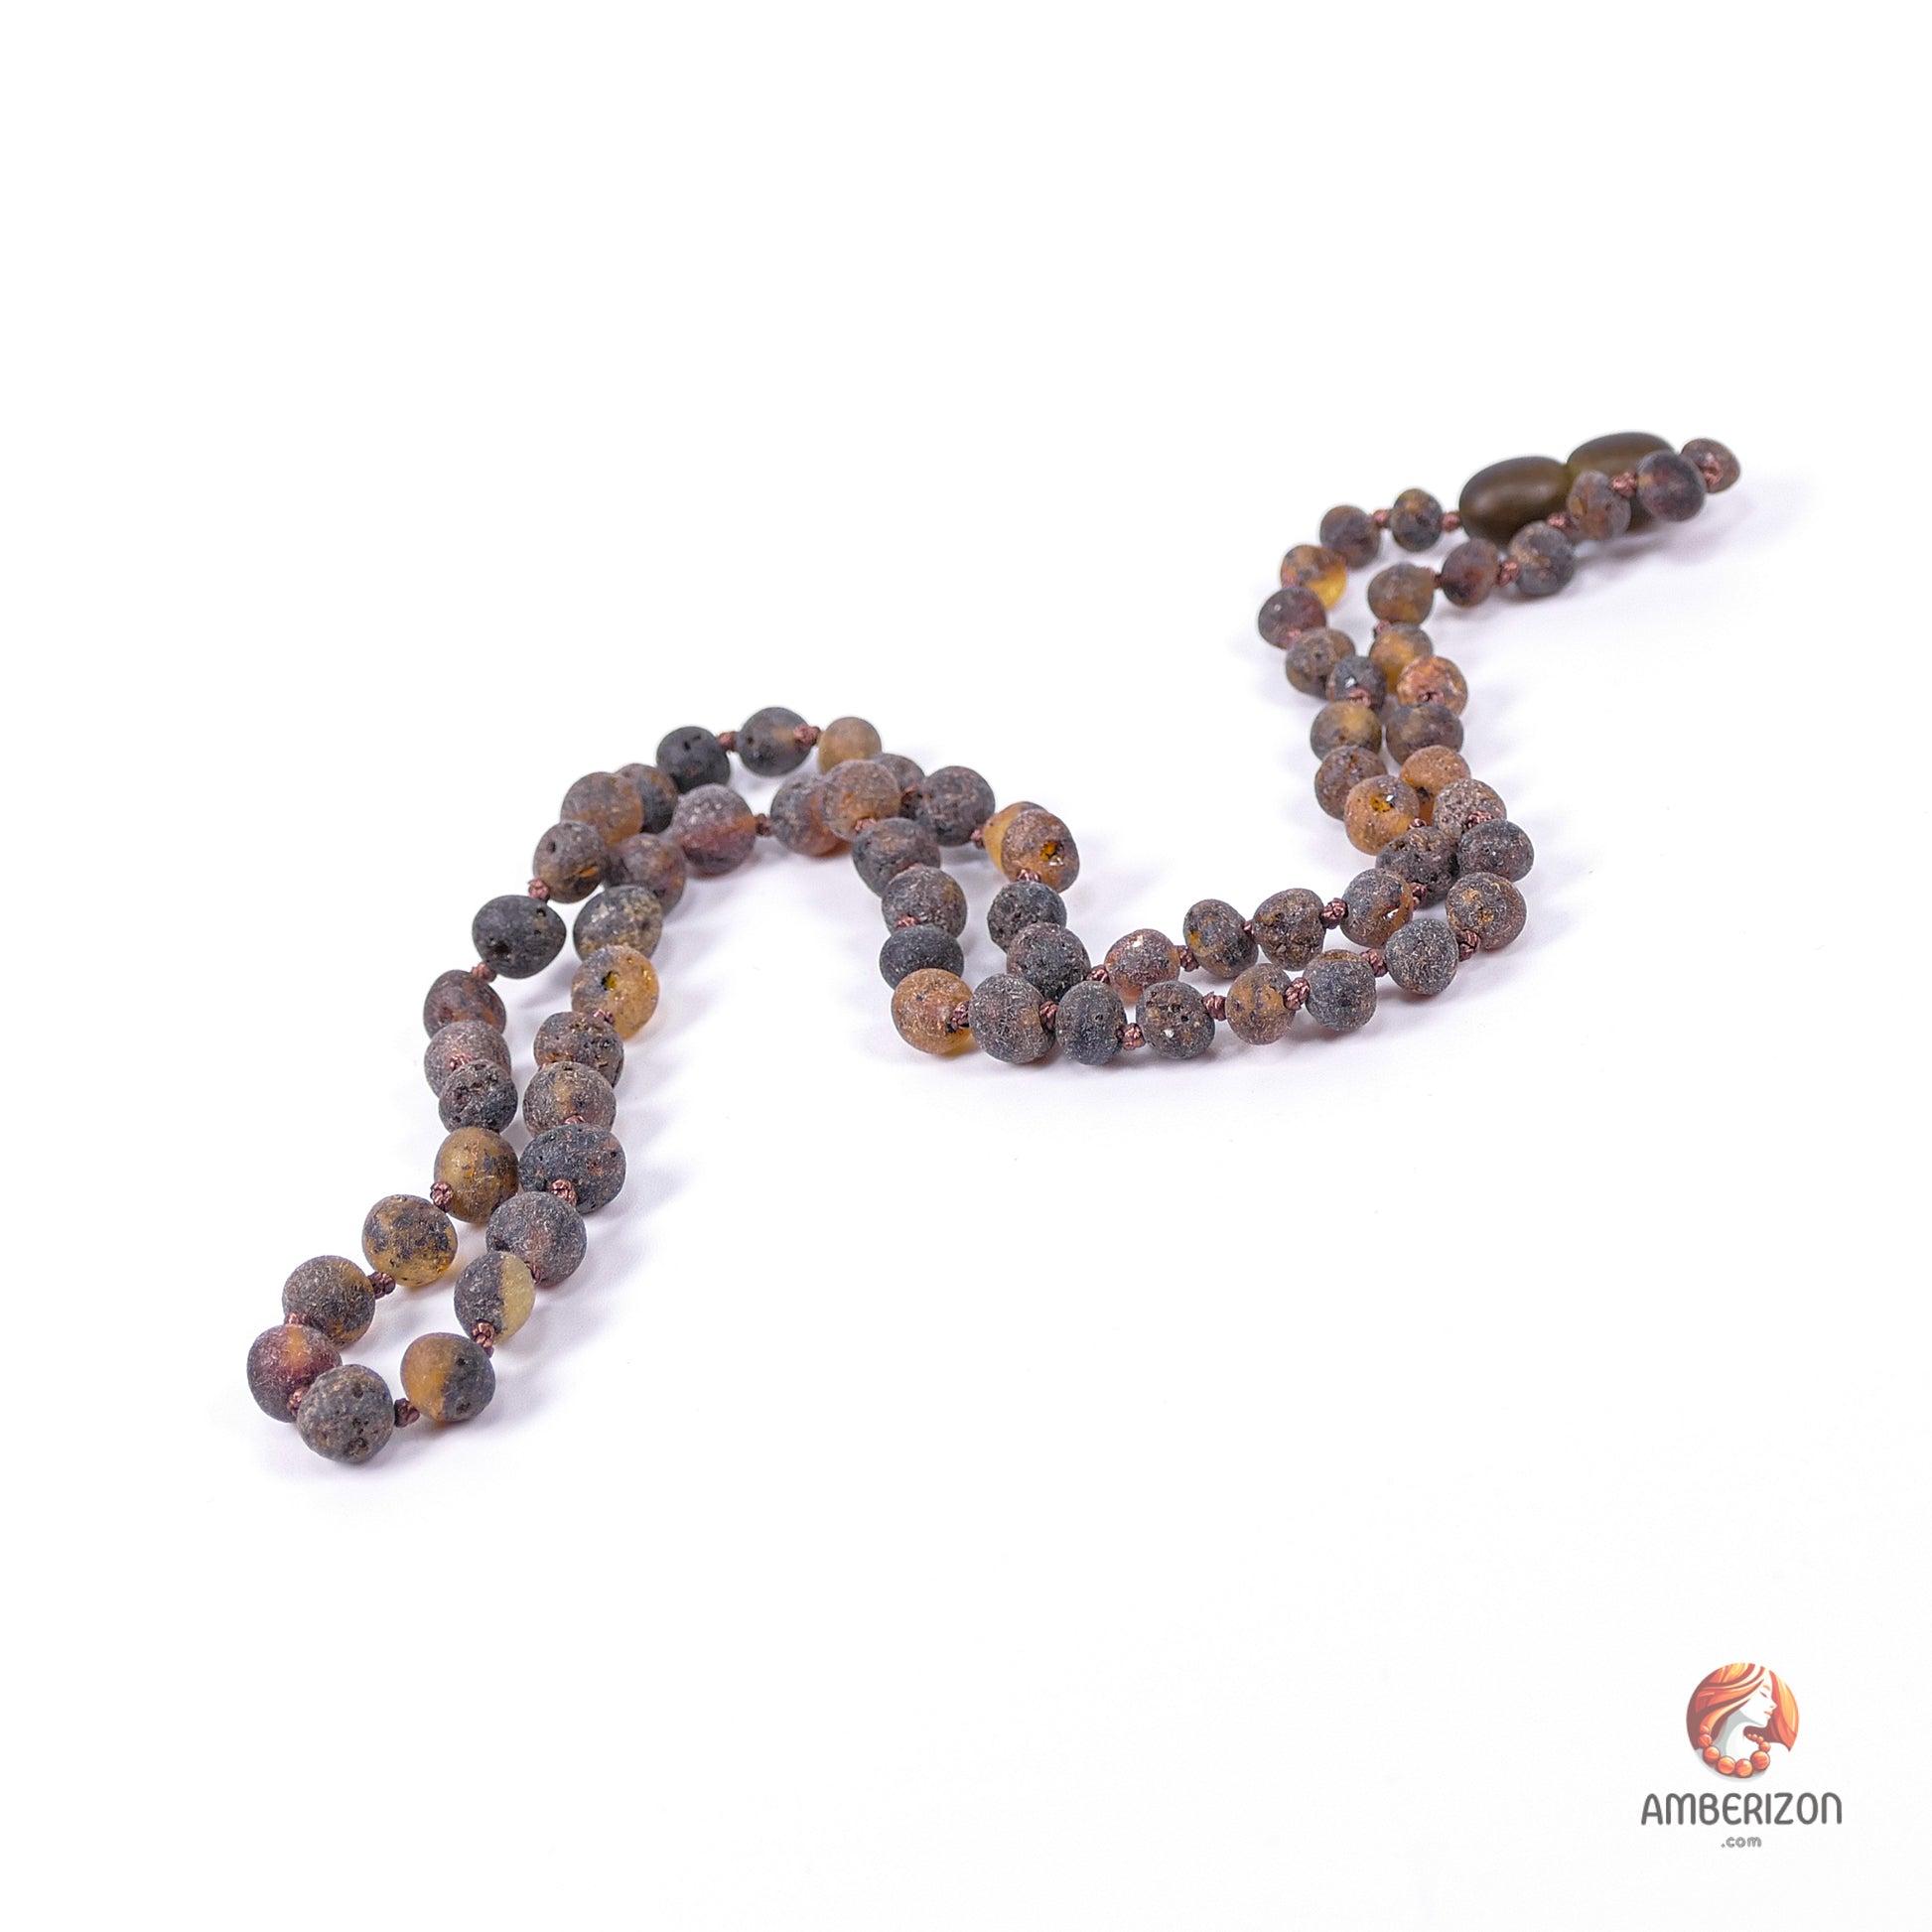 Minimalist baroque bead necklace for woman - Minimalist necklaces for adults and teenagers